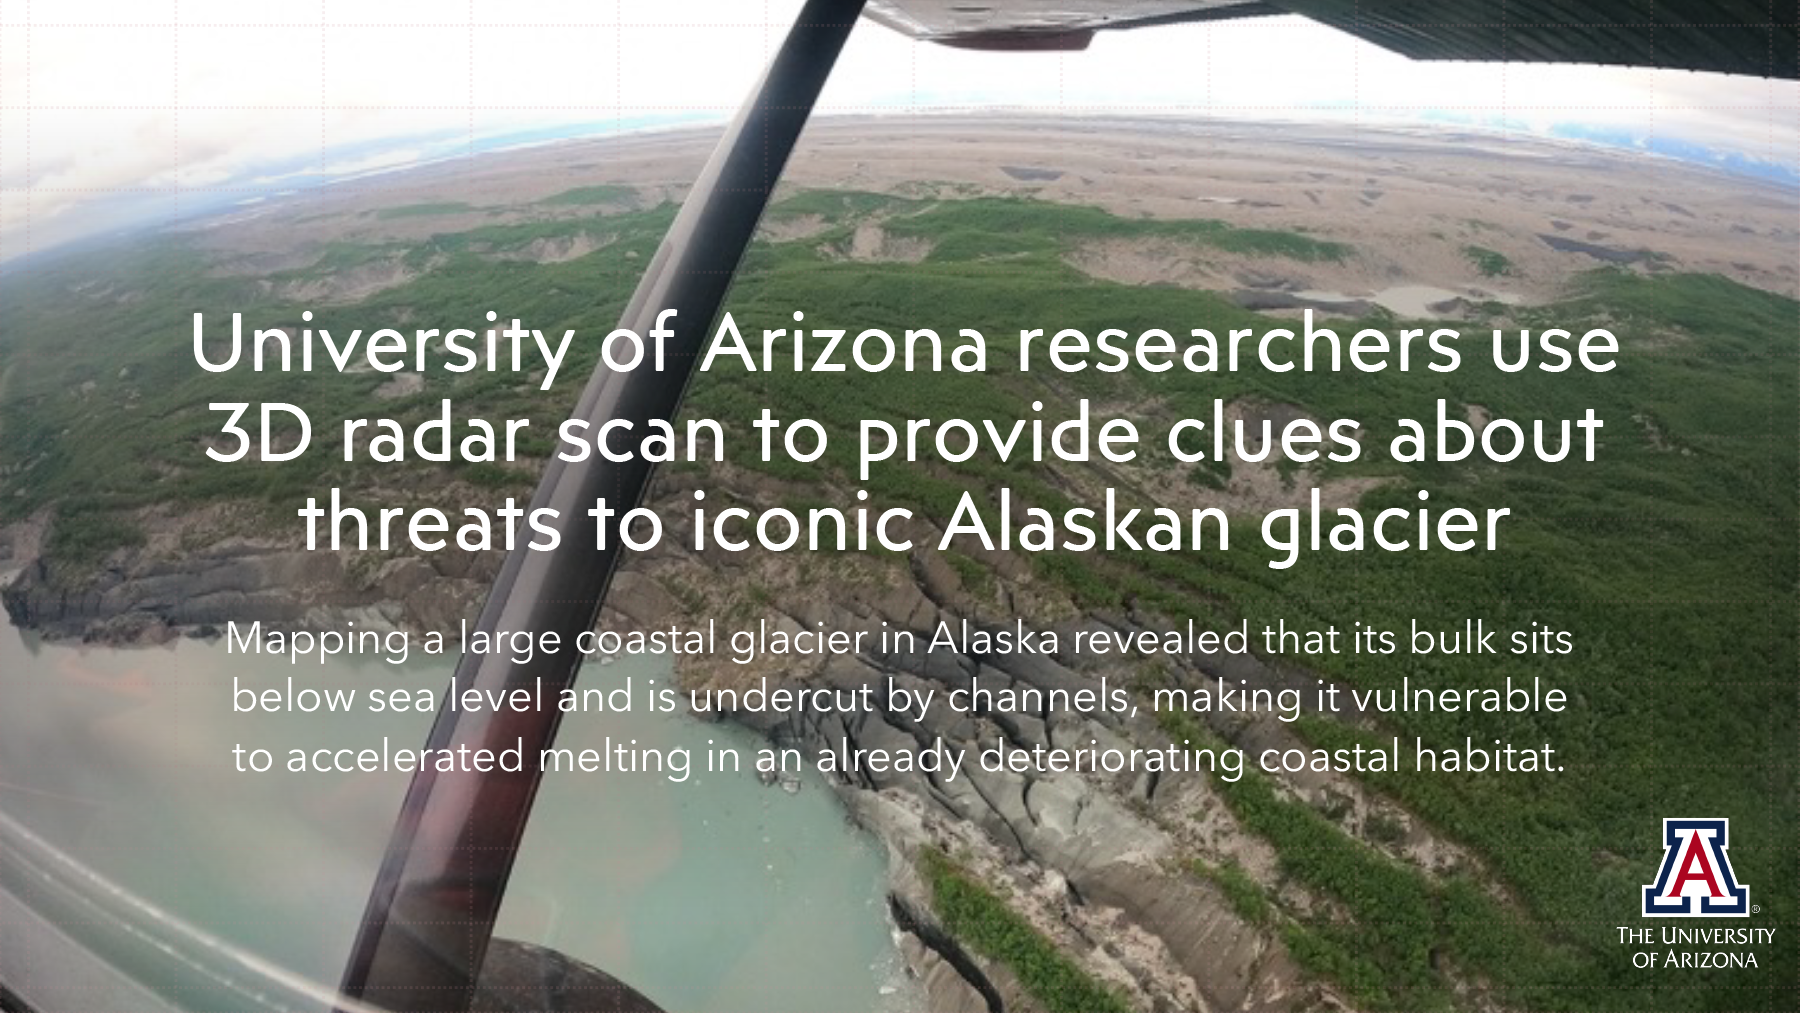 3D radar scans provide clues about threats to iconic Alaskan glacier